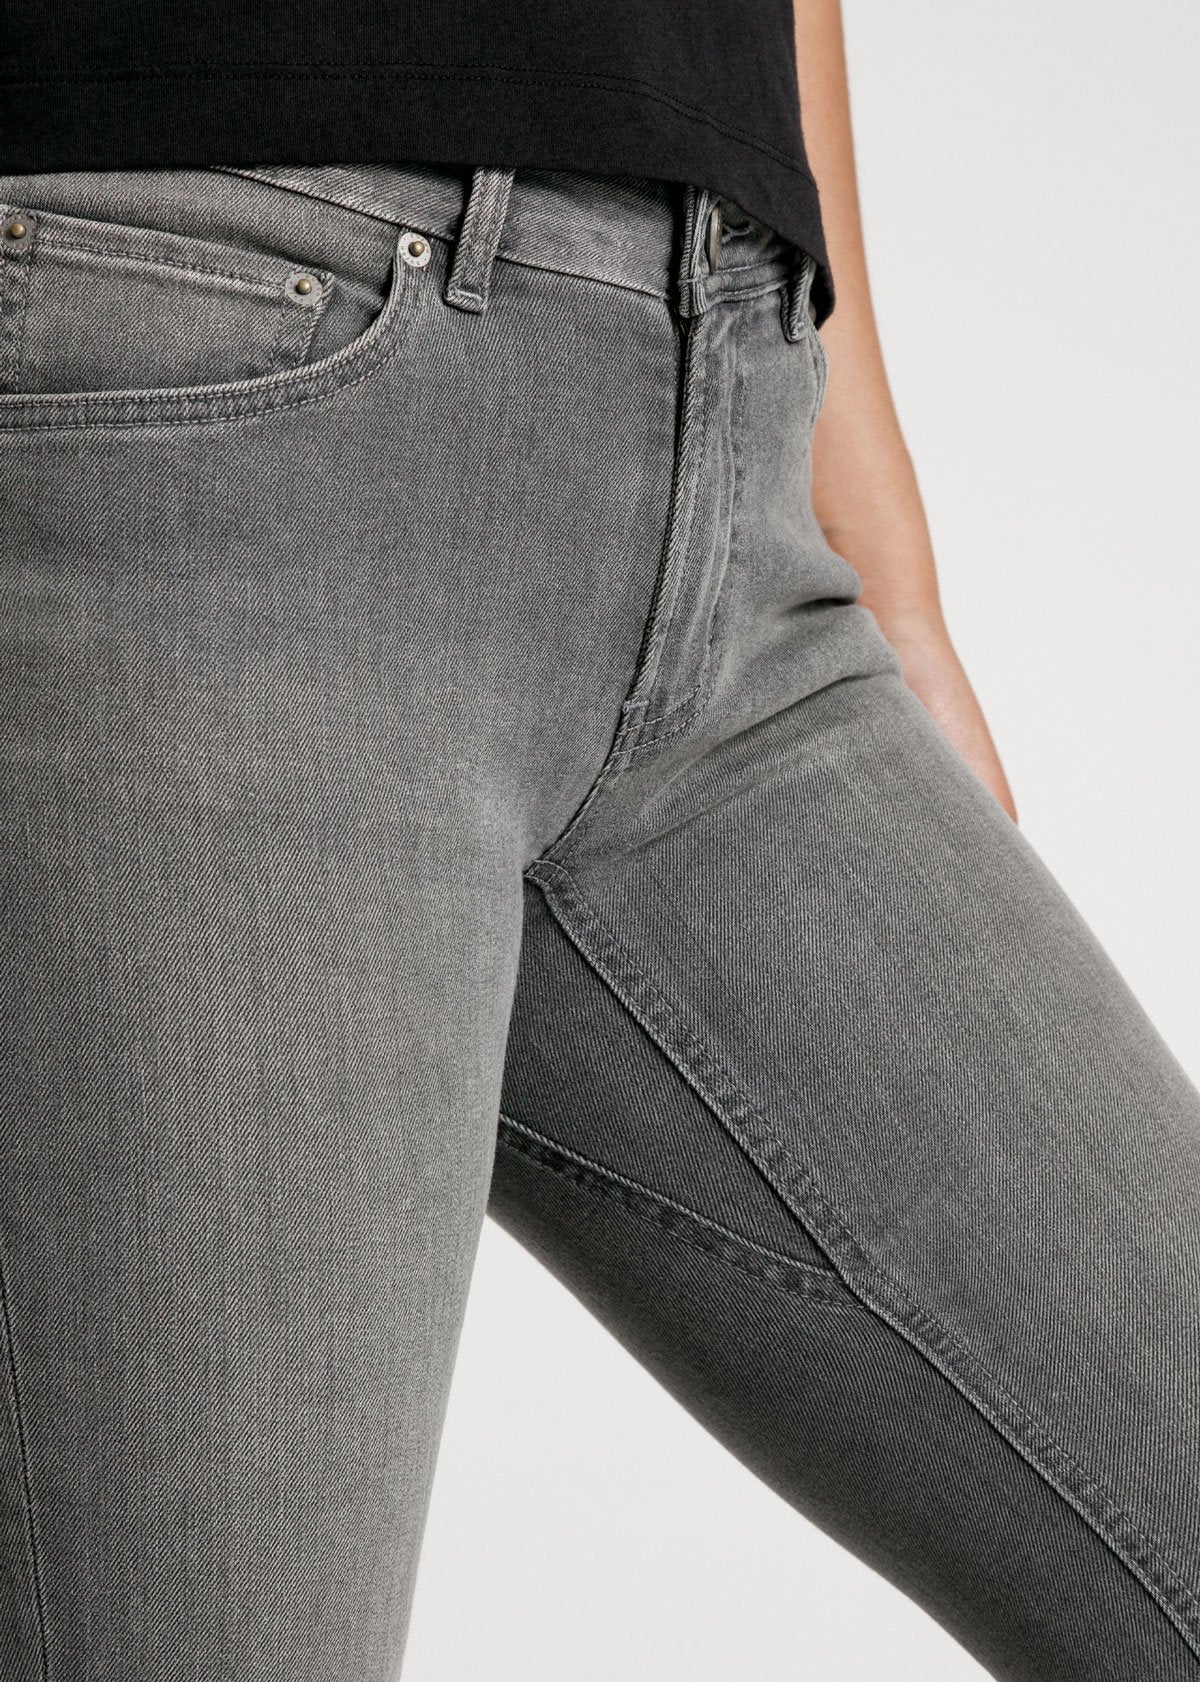 womens grey mid rise skinny fit stretch jeans side detail